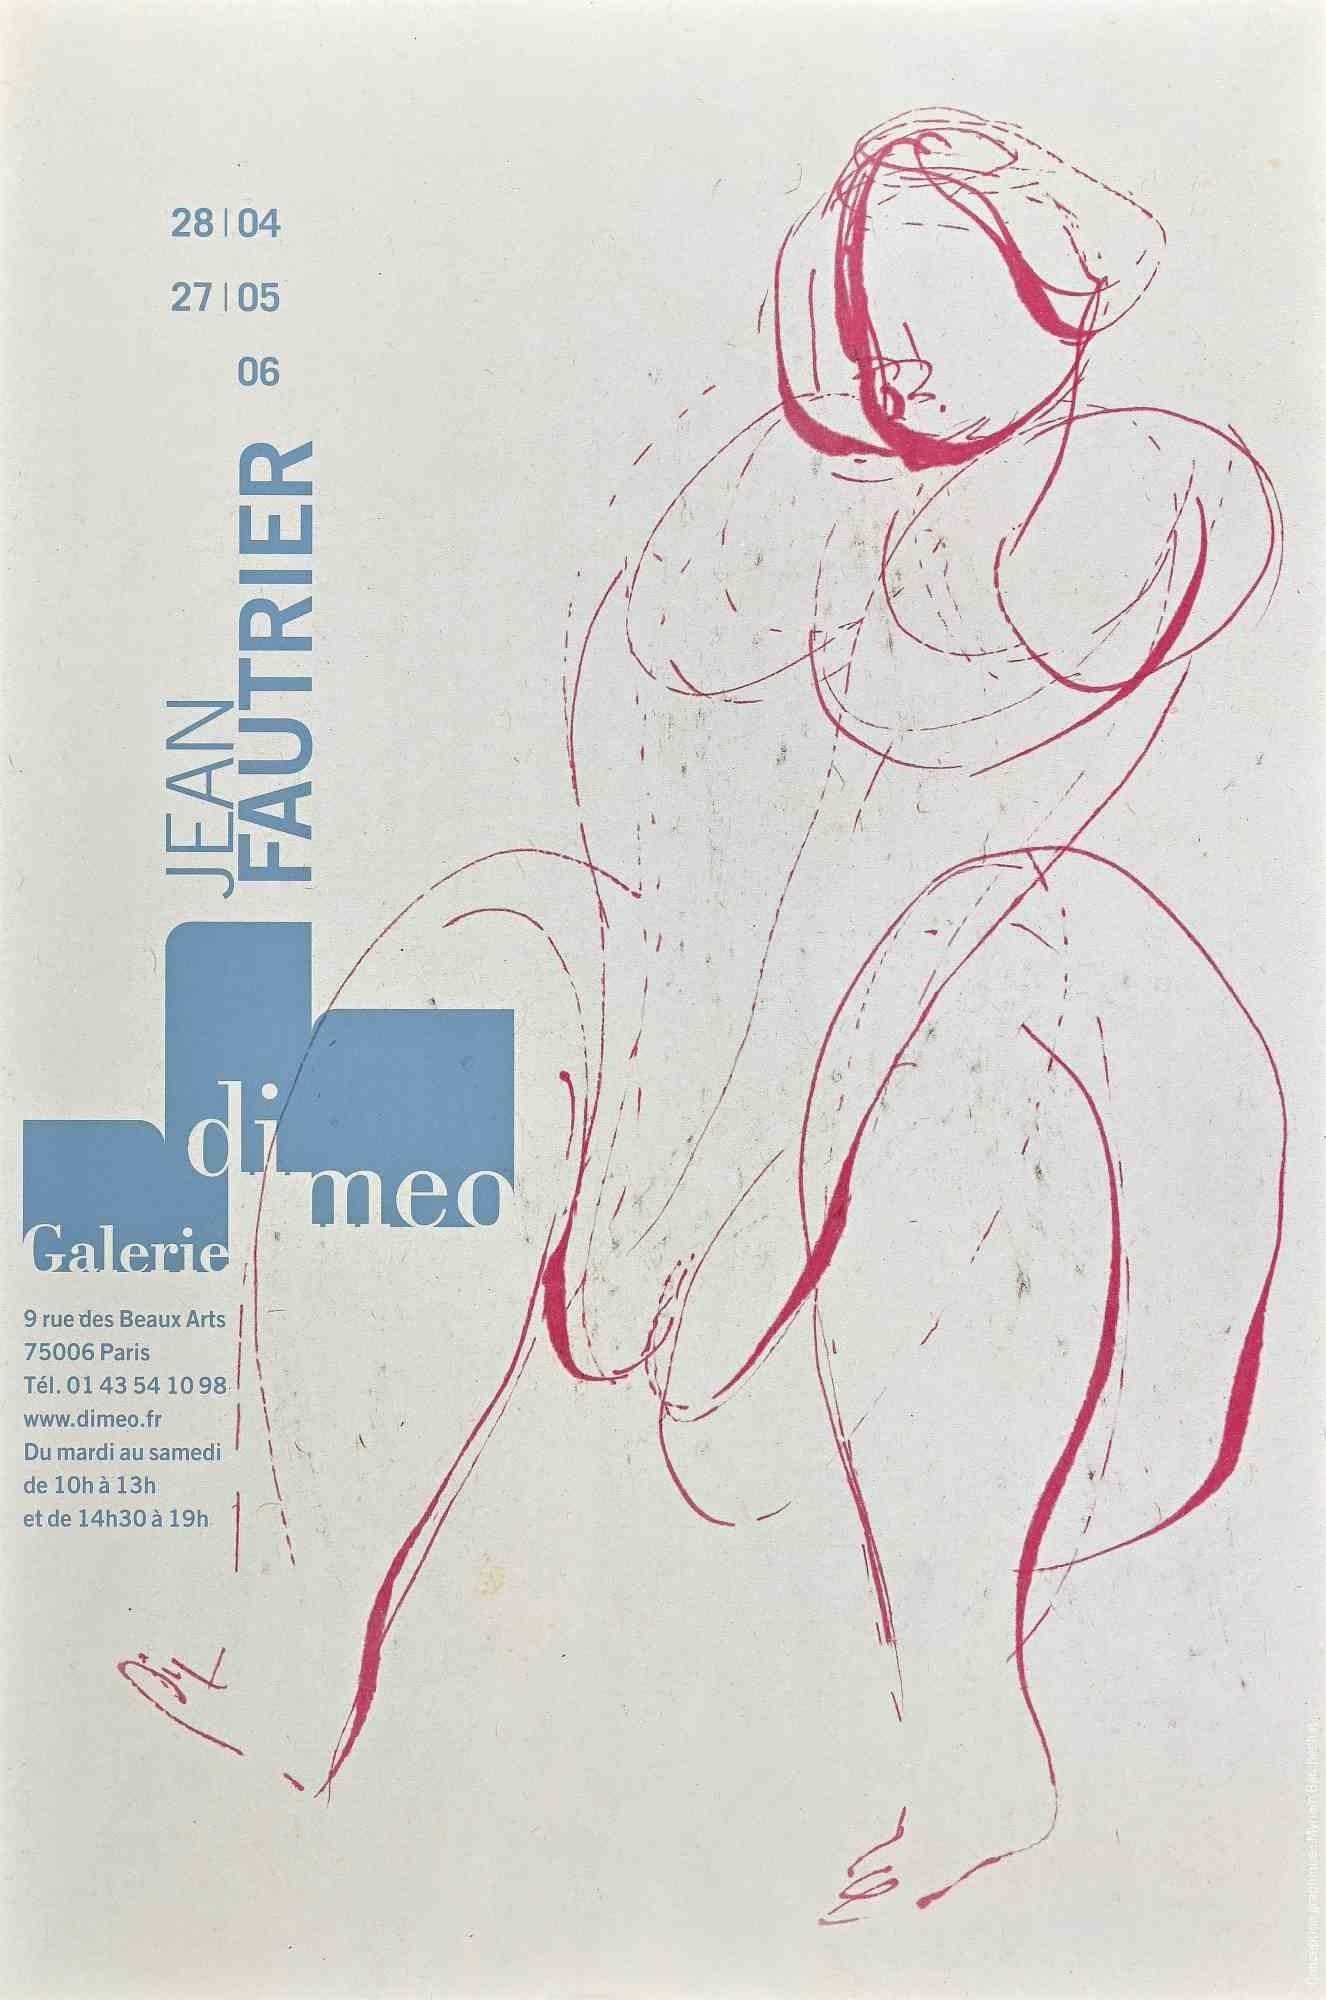 Vintage Exhibition Poster is a vintage Offset print realized for the exhibition of Jean Fautrier held in 2006.

Good condition, no signature.

The exhibition was held in Galerie Di Meo in Paris.

Jean Fautrier (May 16, 1898 – July 21, 1964) was a